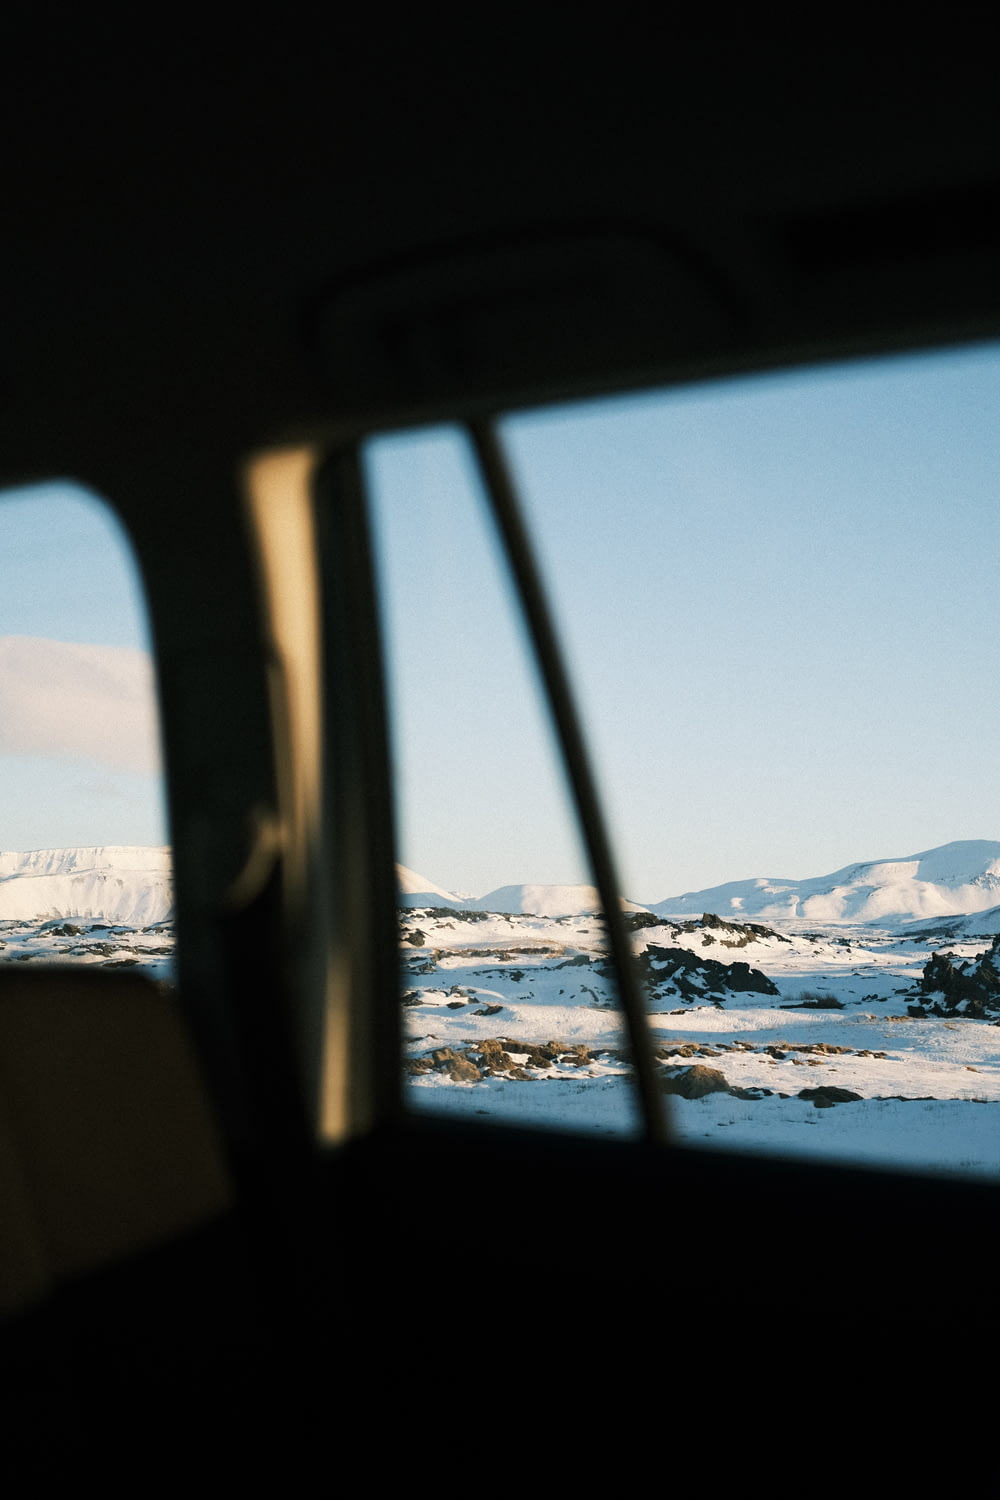 a view of a snowy landscape from a car window